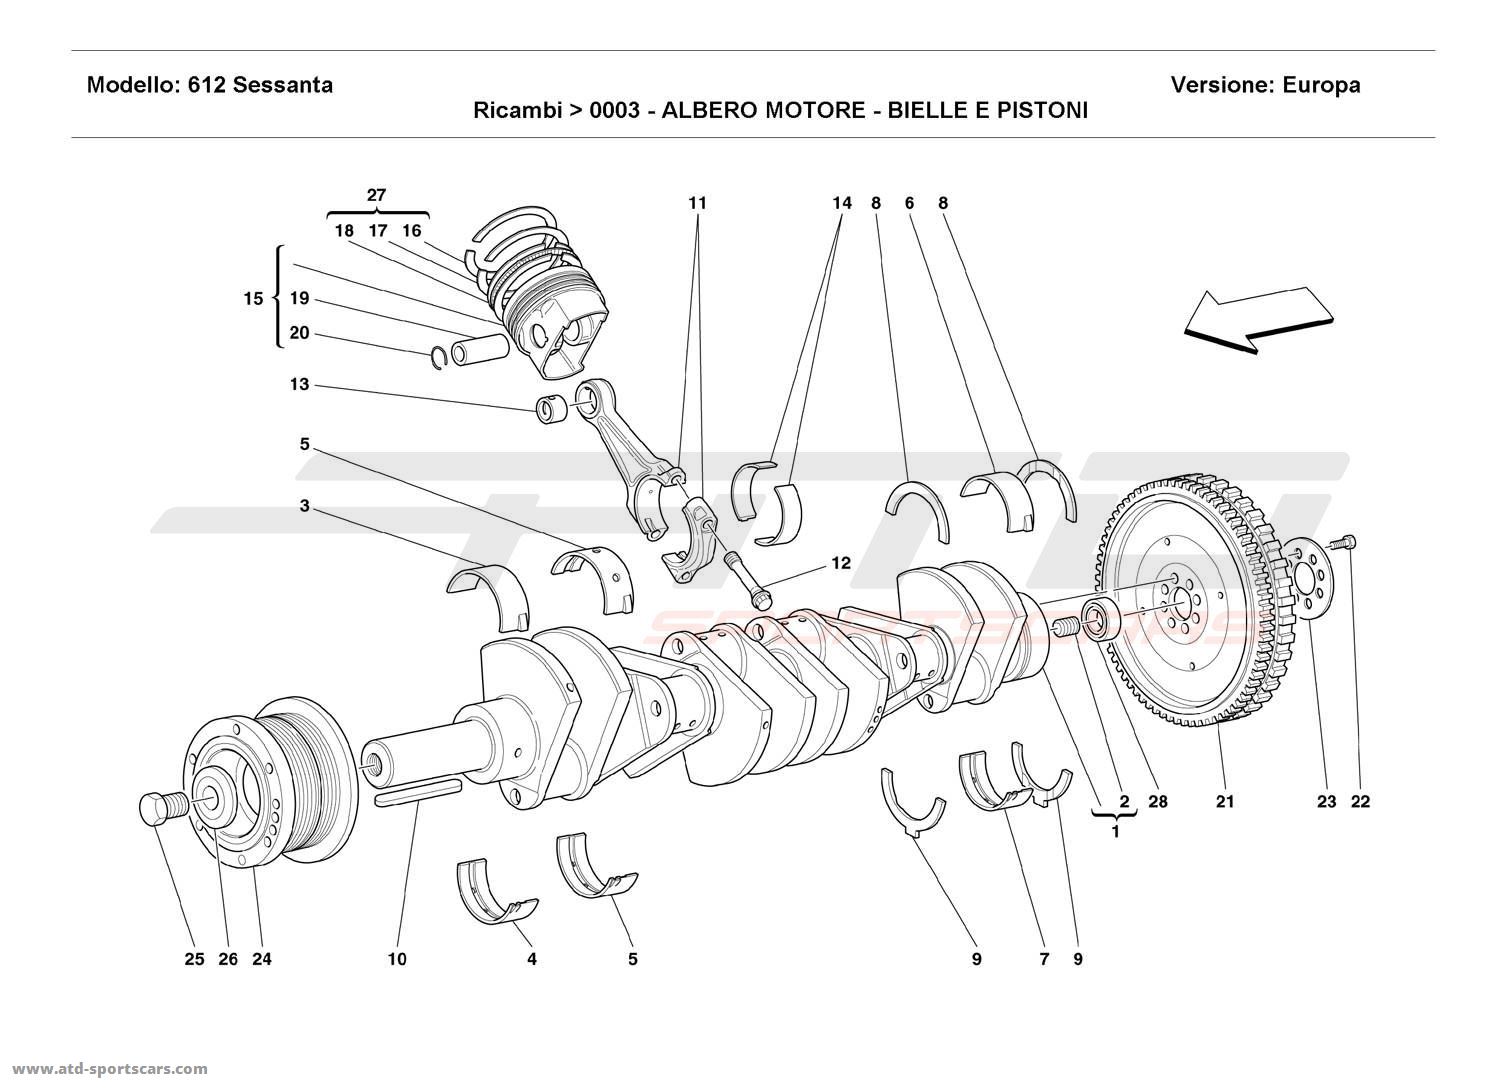 Ferrari 612 Sessanta DRIVING SHAFT - CONNECTING RODS AND PISTONS